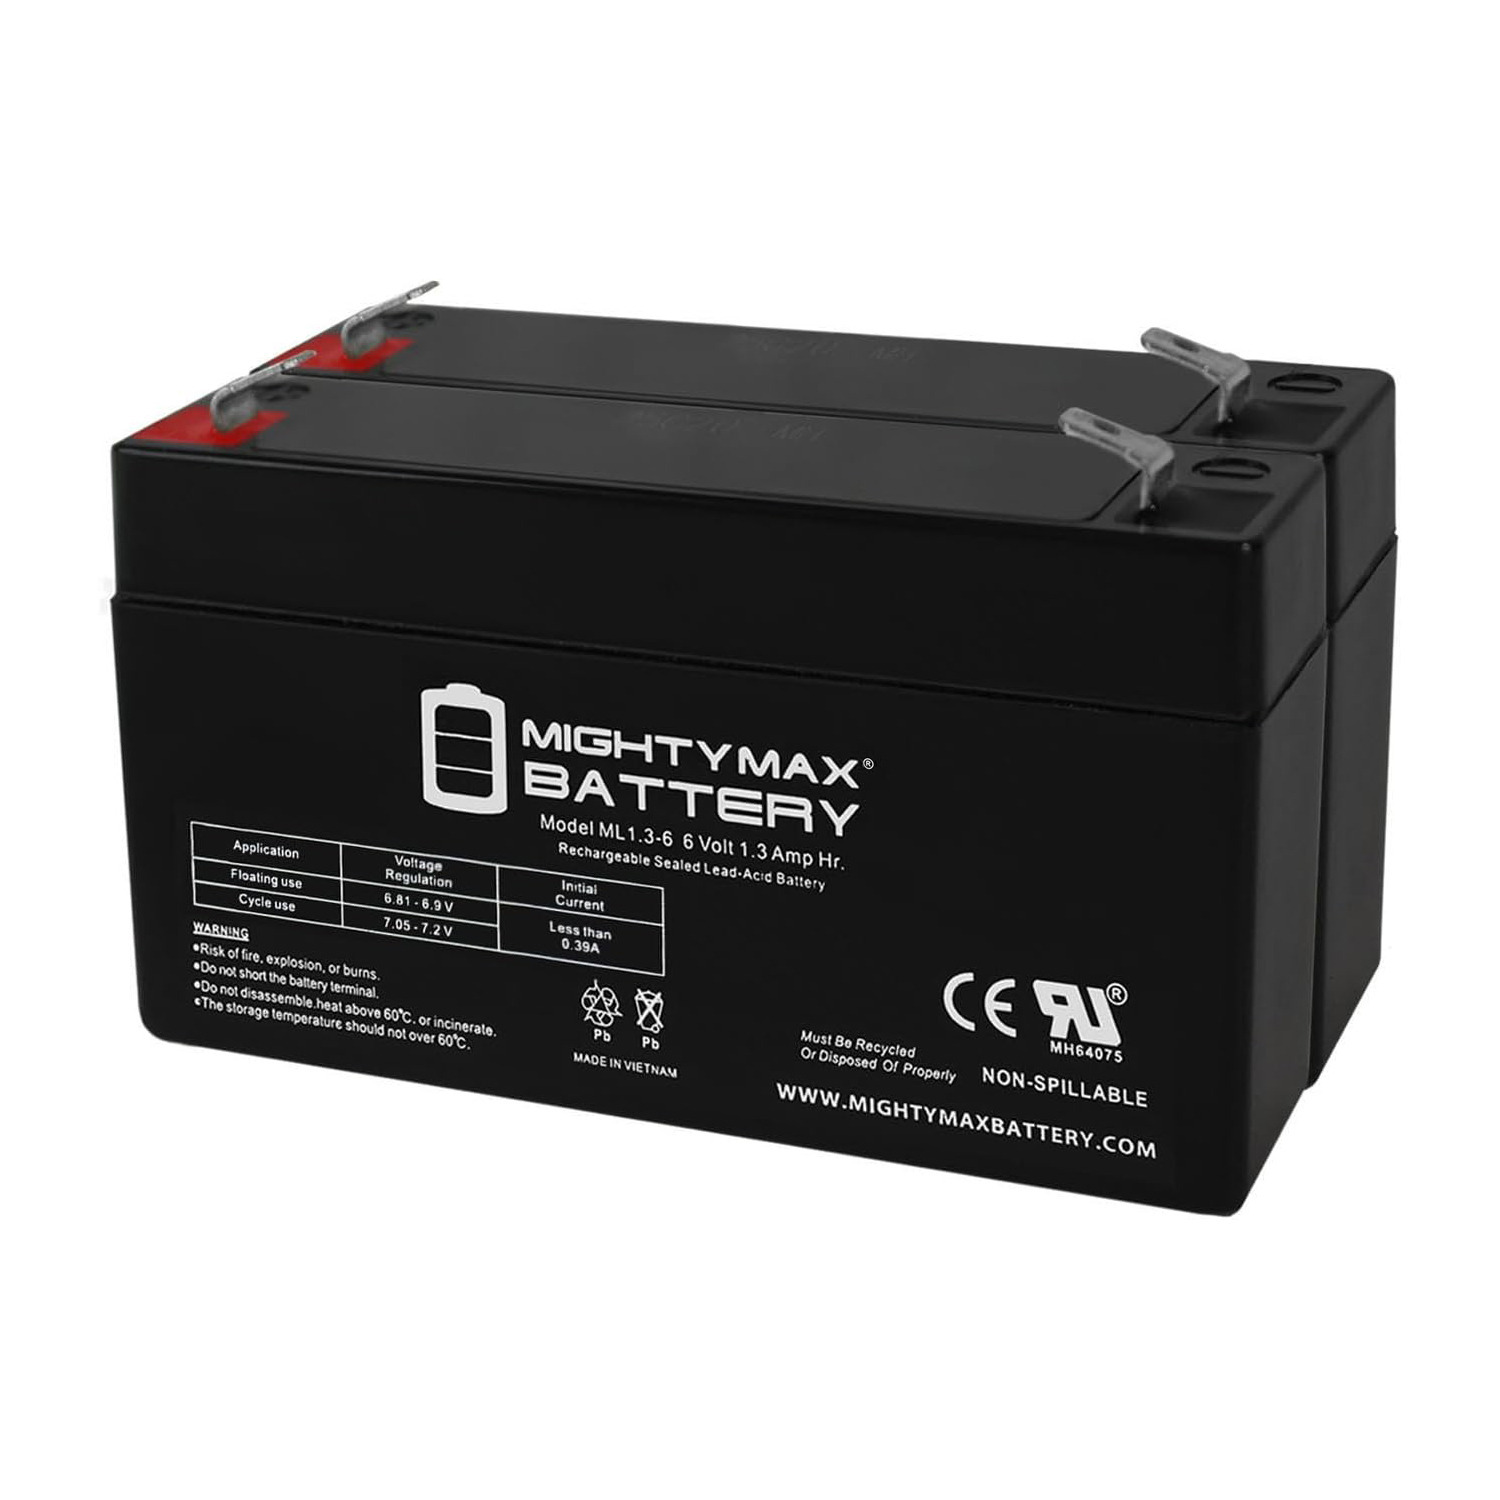 6V 1.3Ah SLA Replacement Battery for NPP NP6-1.3Ah - 2 Pack